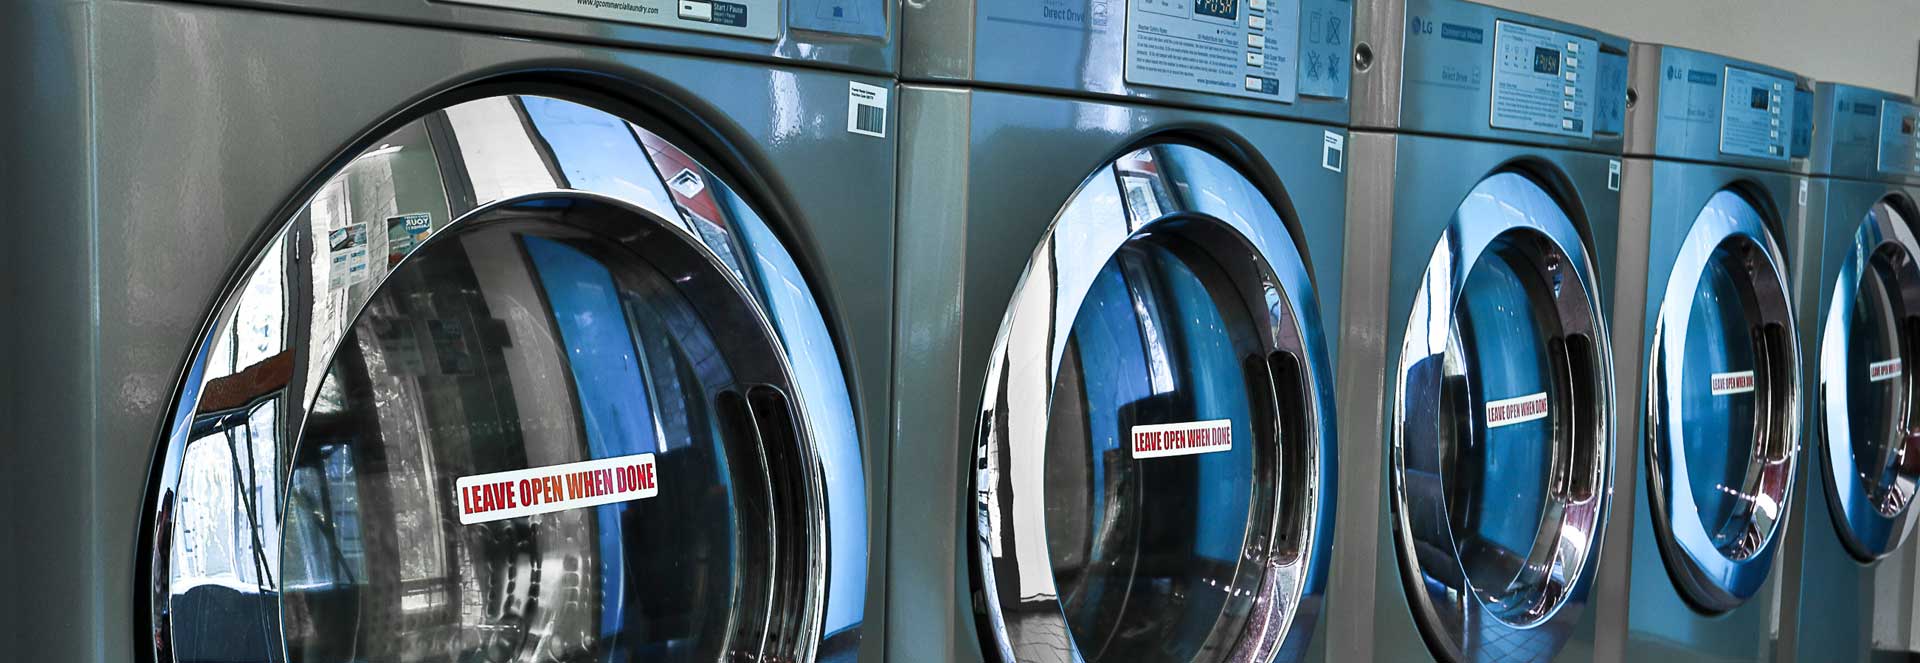 Card-Operated vs. Coin-Operated Commercial Laundry Machines